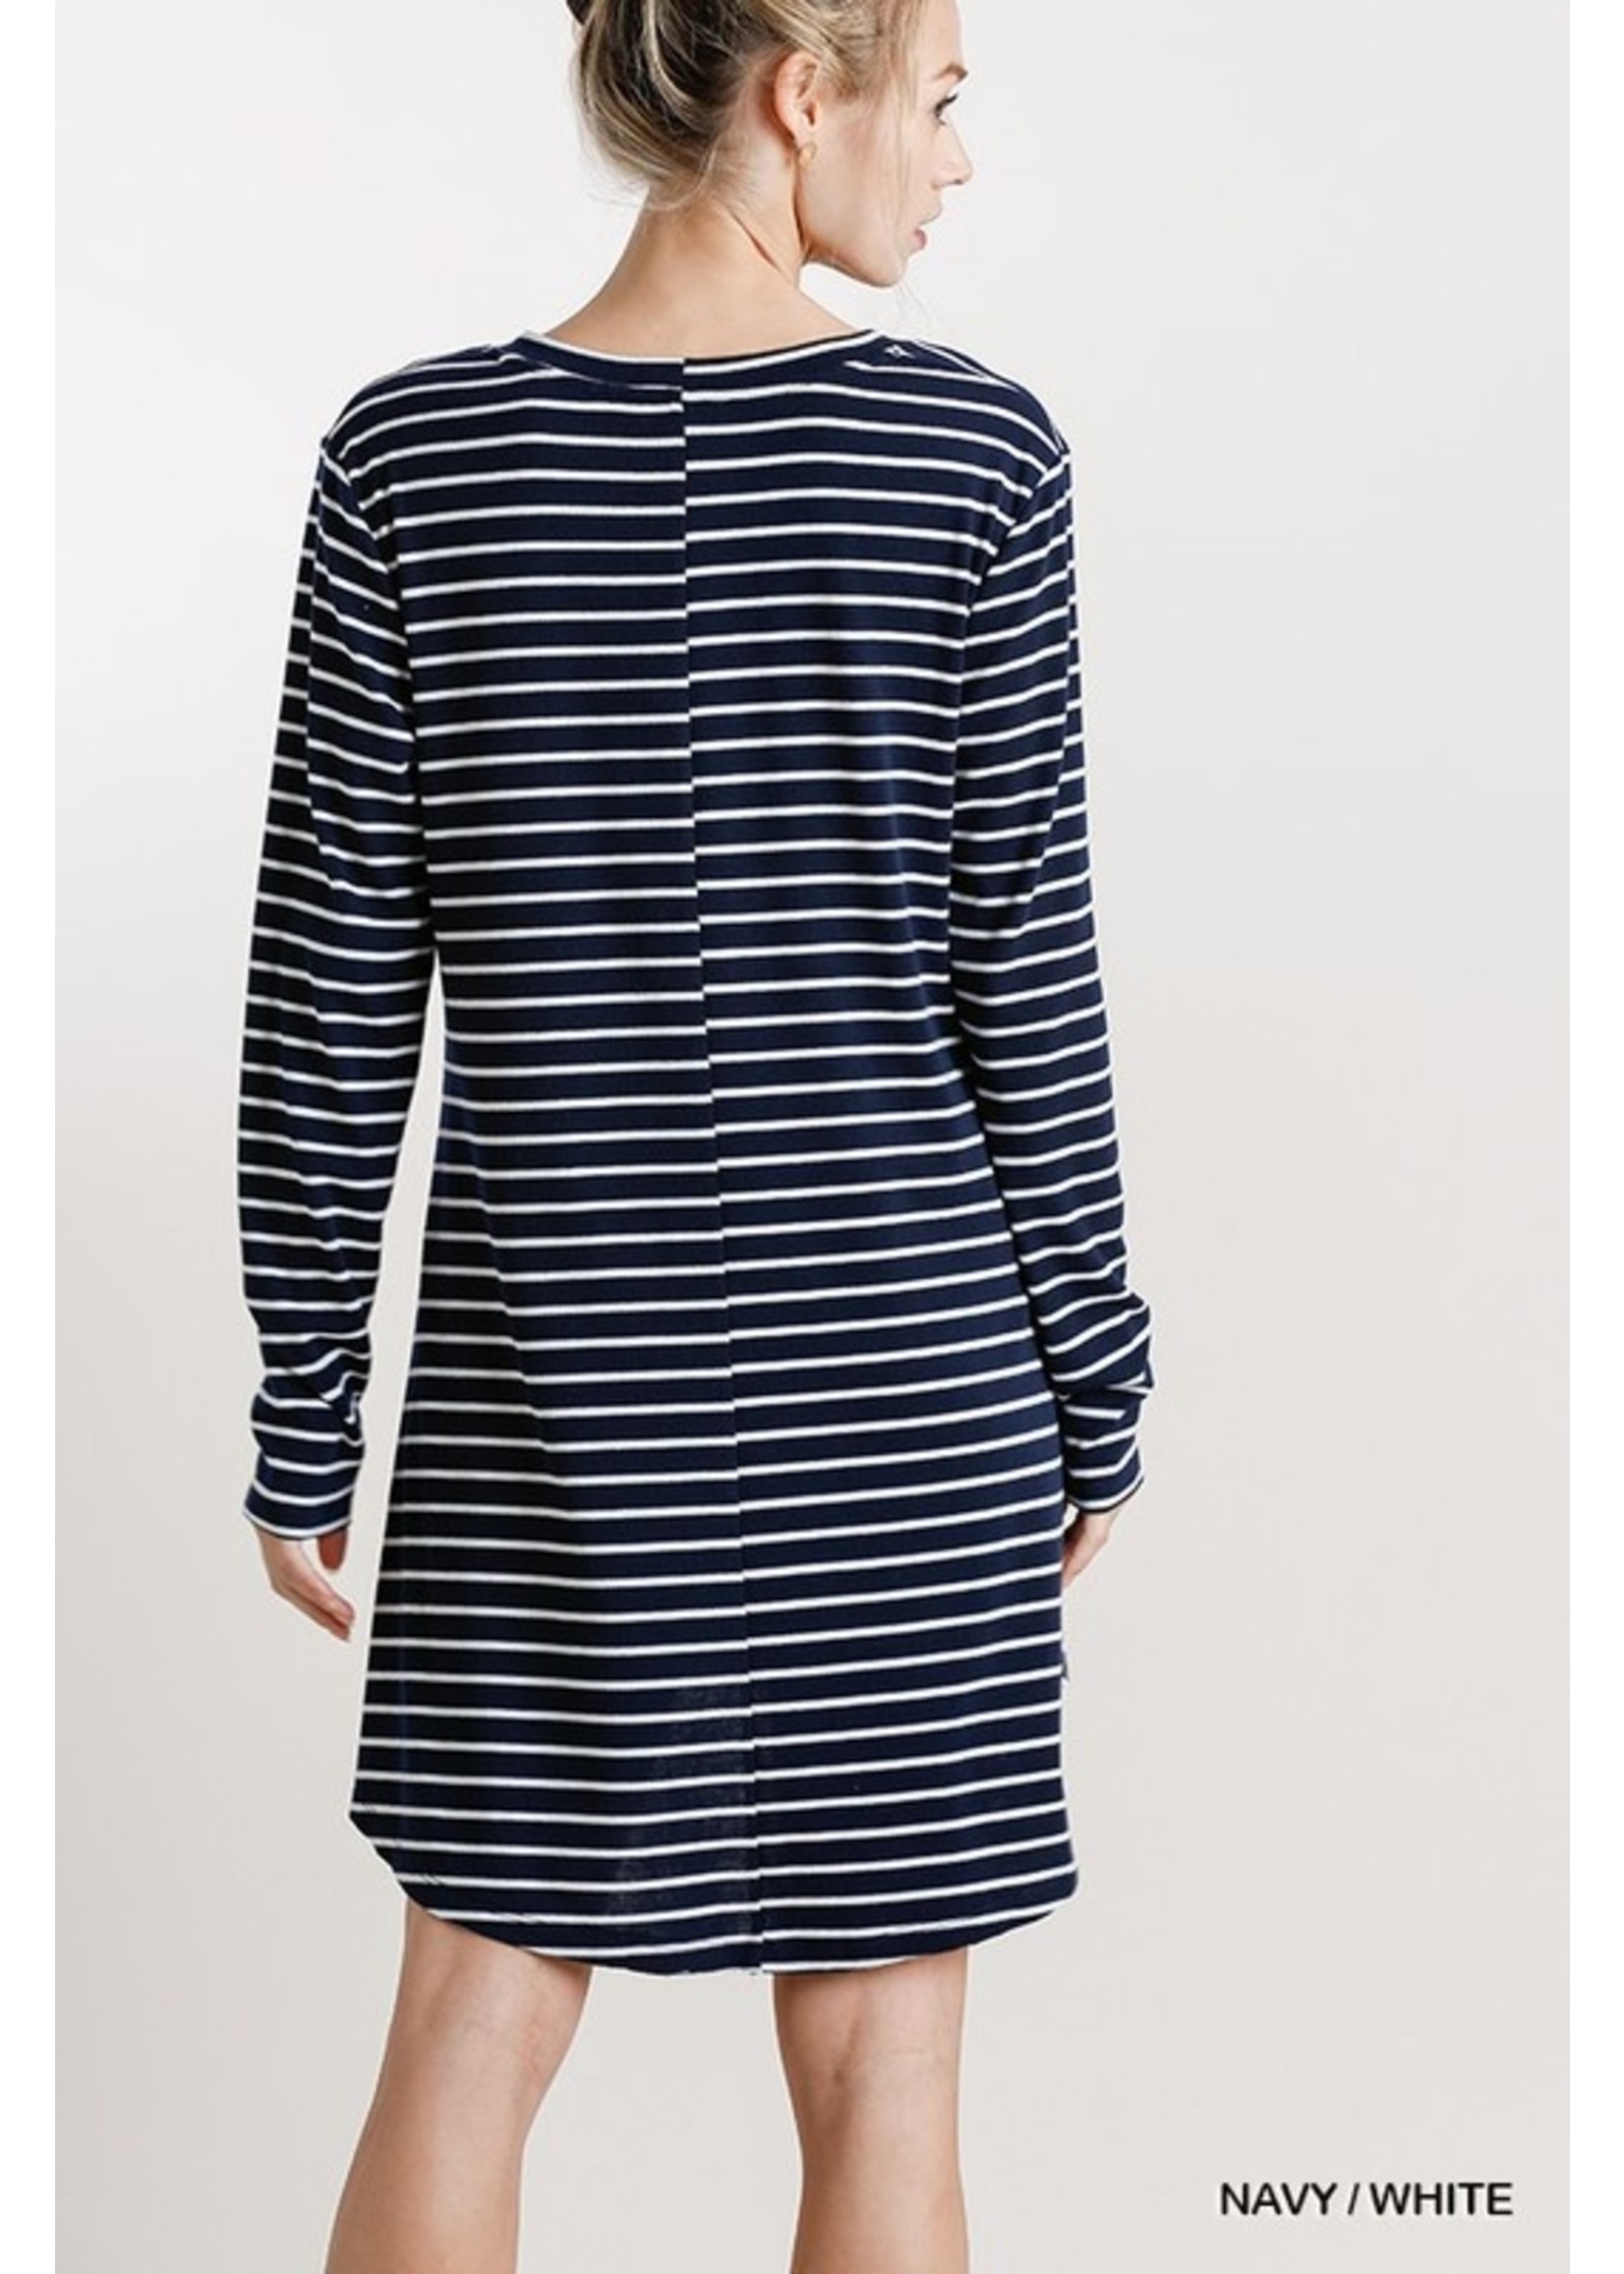 The Allie Pocketed Striped Dress